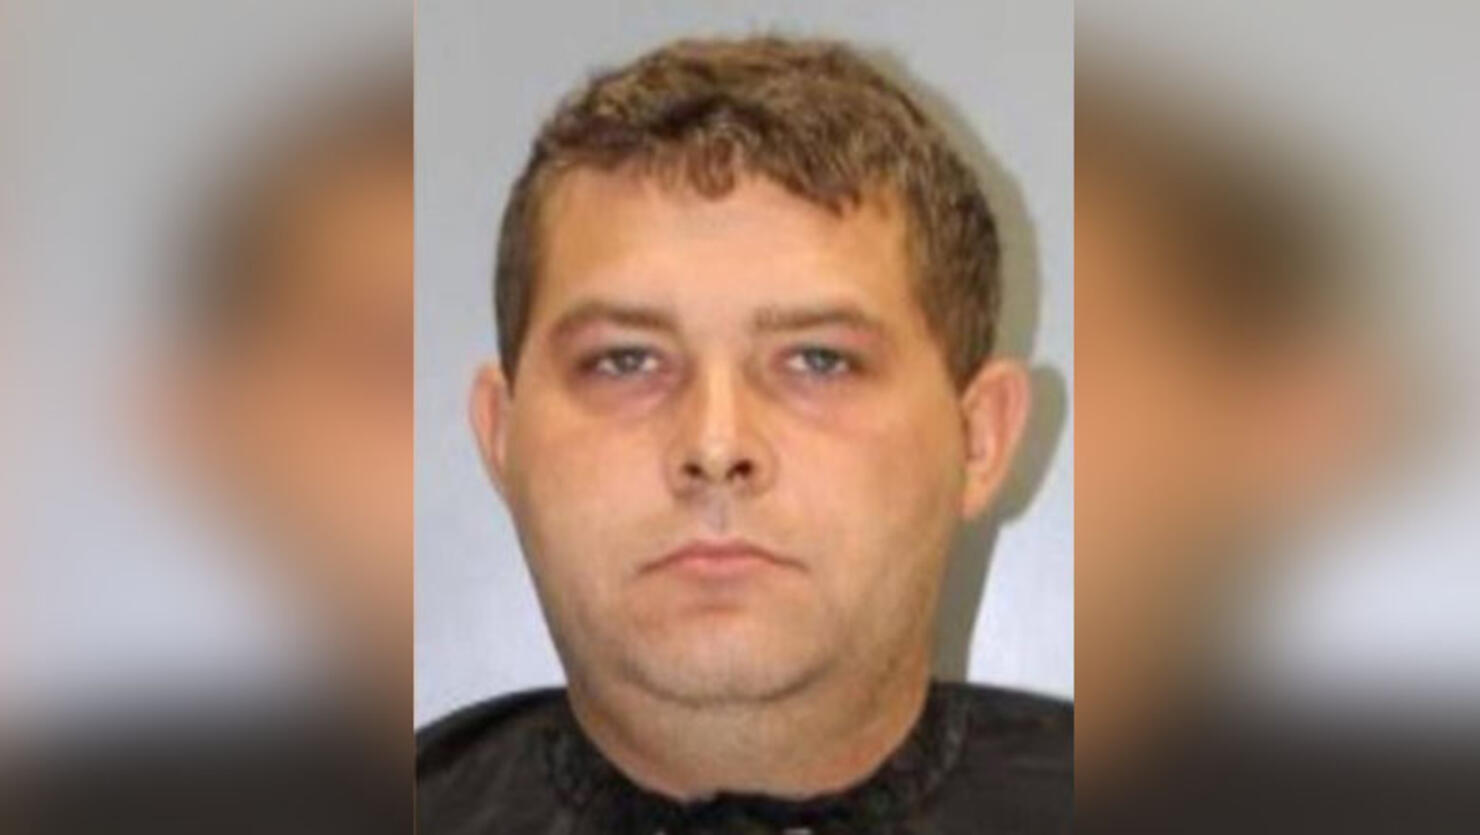 Cop Busted Soliciting Minor For Sex In Sting Set Up By His Own Department Iheart 